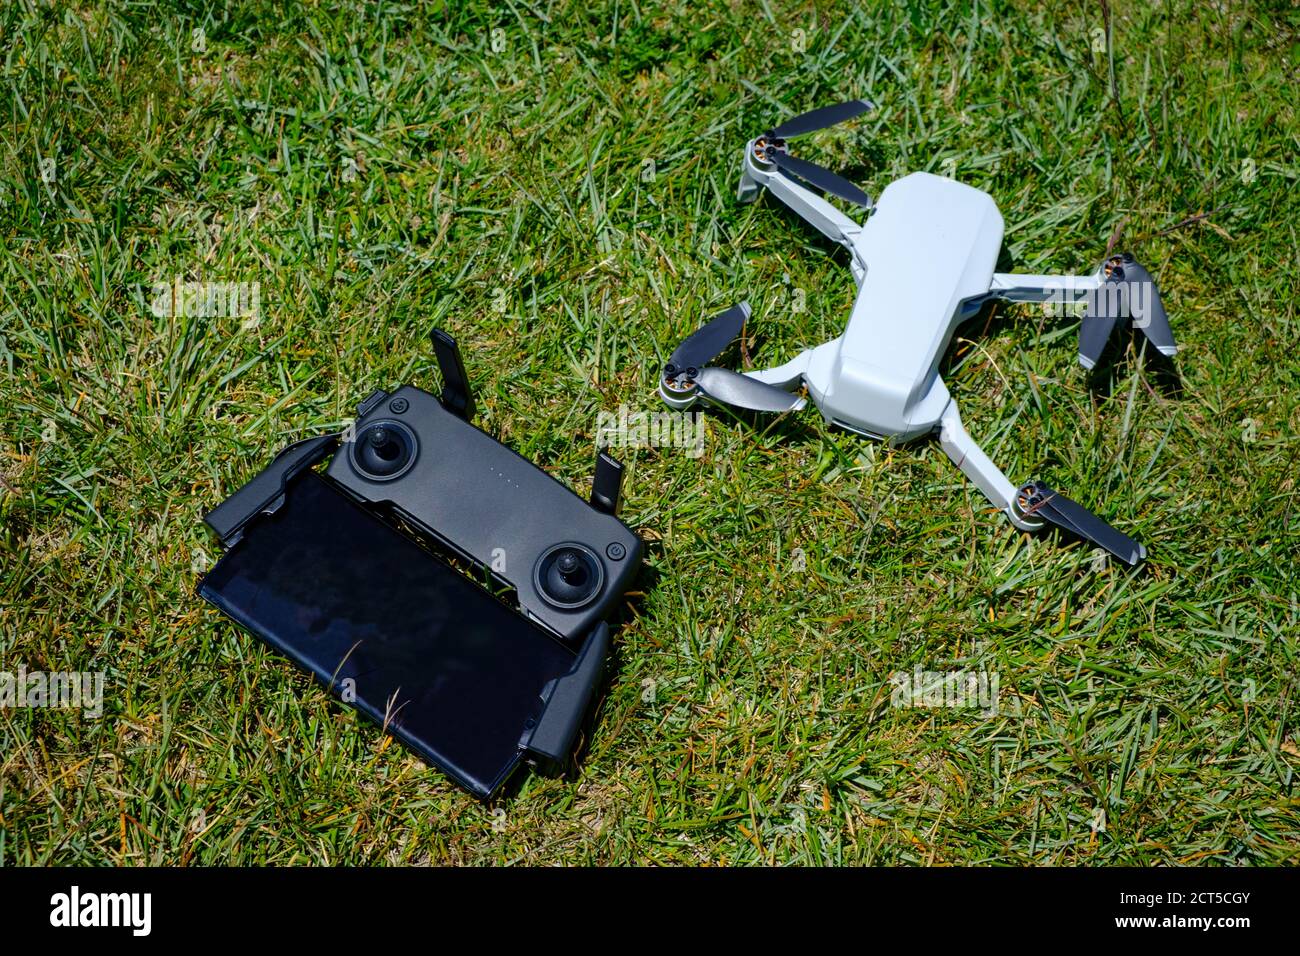 Portable mini drone with its remote control attached to a smartphone on a grass background Stock Photo